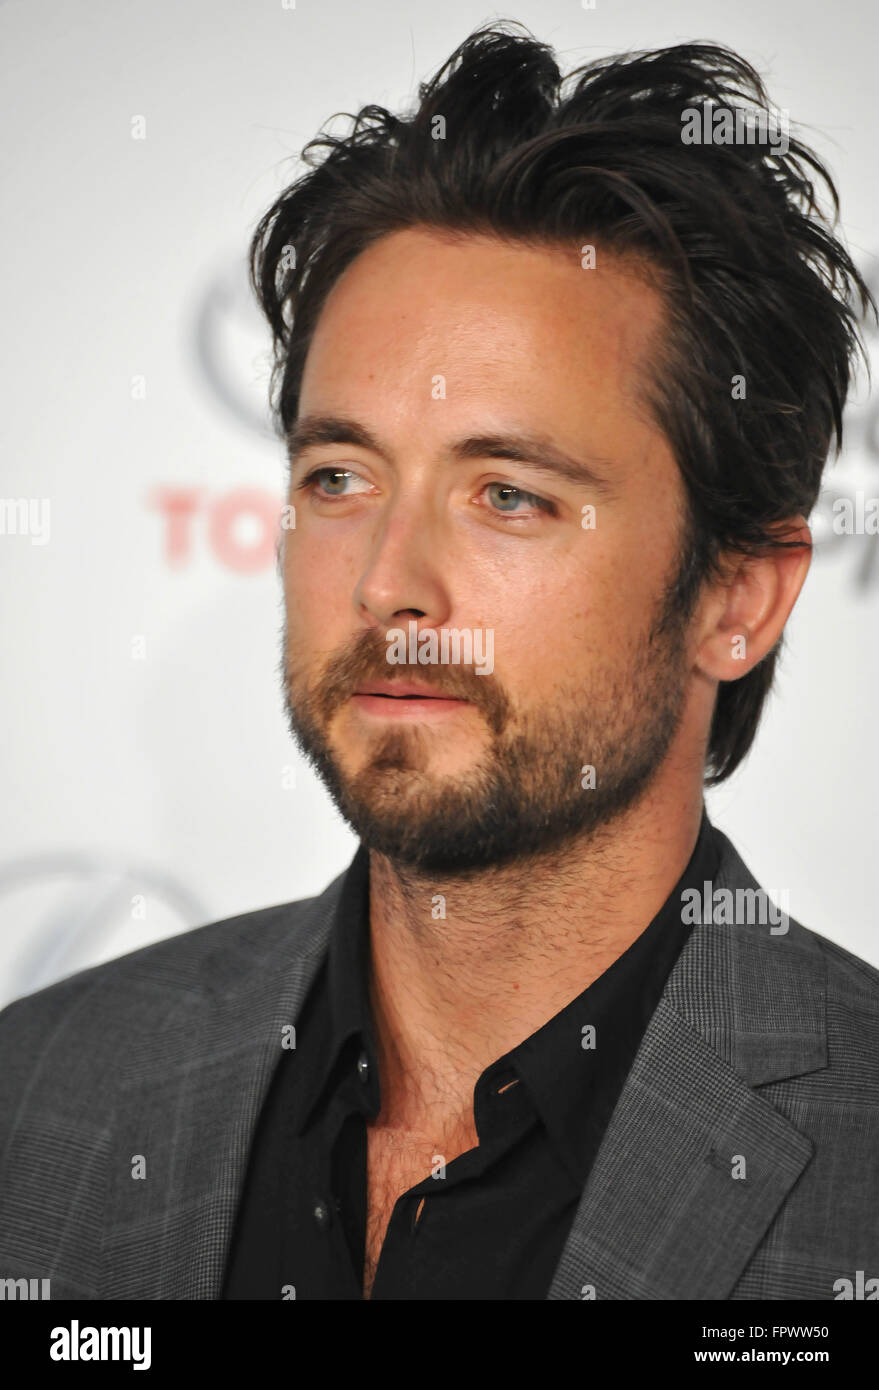 Justin Chatwin (Brown Hair) Celebrity Mask - Celebrity Cutouts